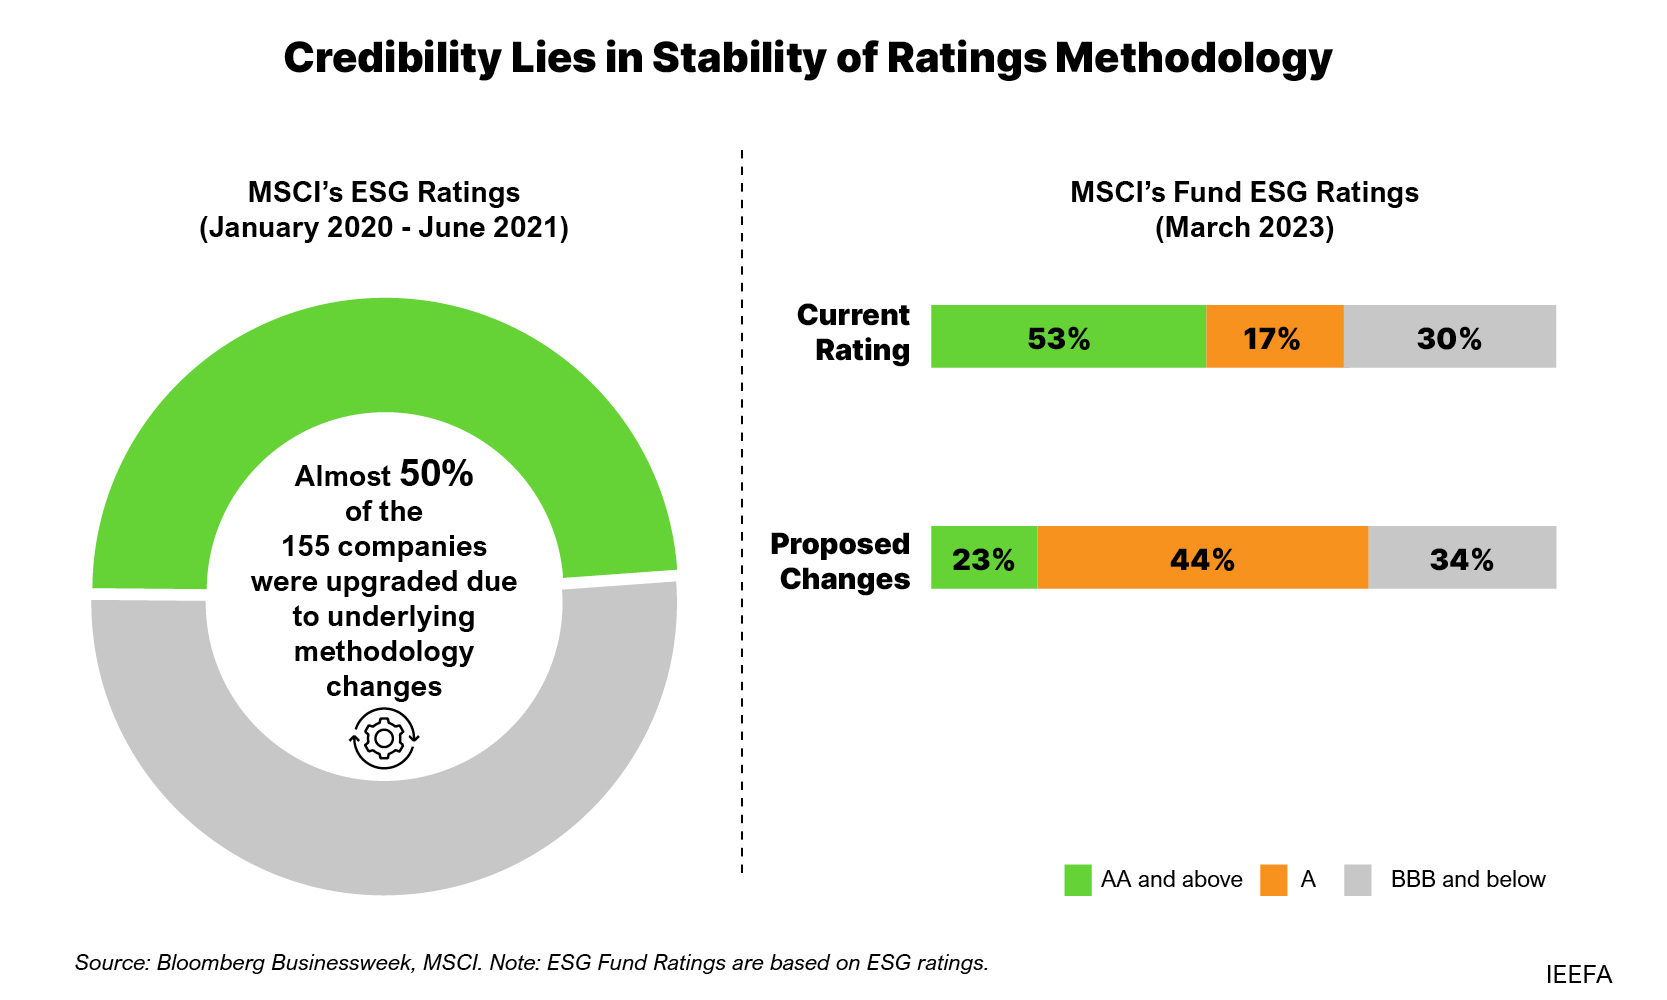 Credibility lies in stability of ratings methodology